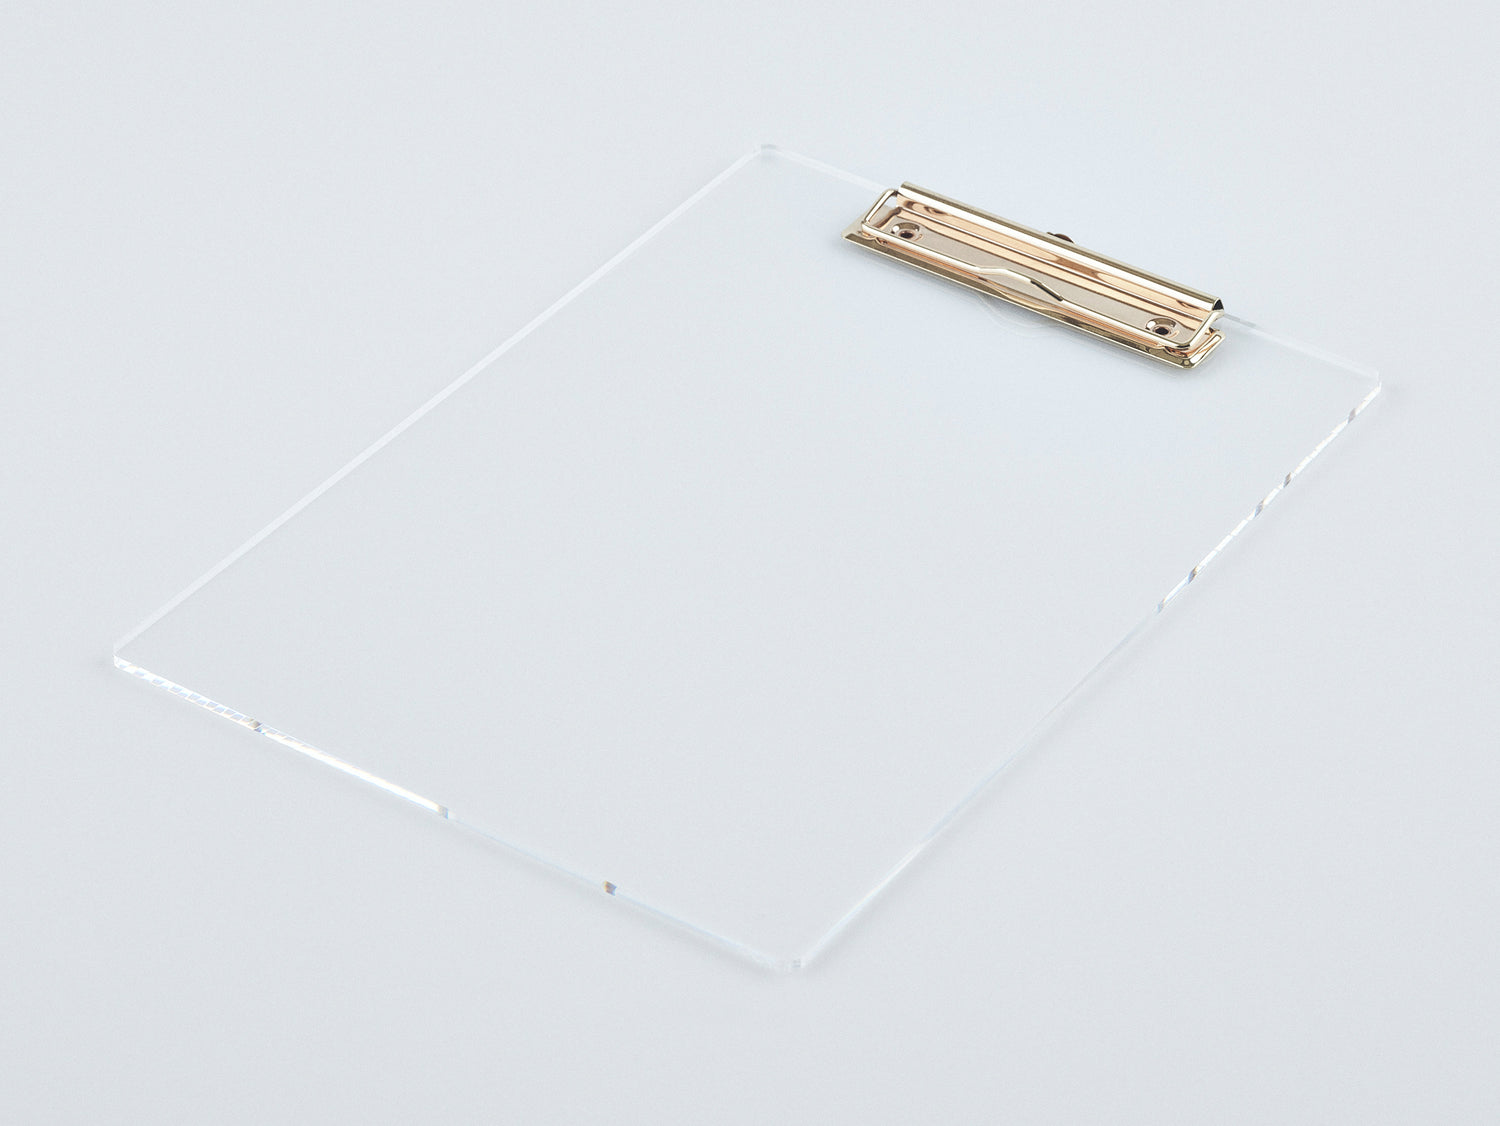 Studio image of an acrylic and gold clipboard.